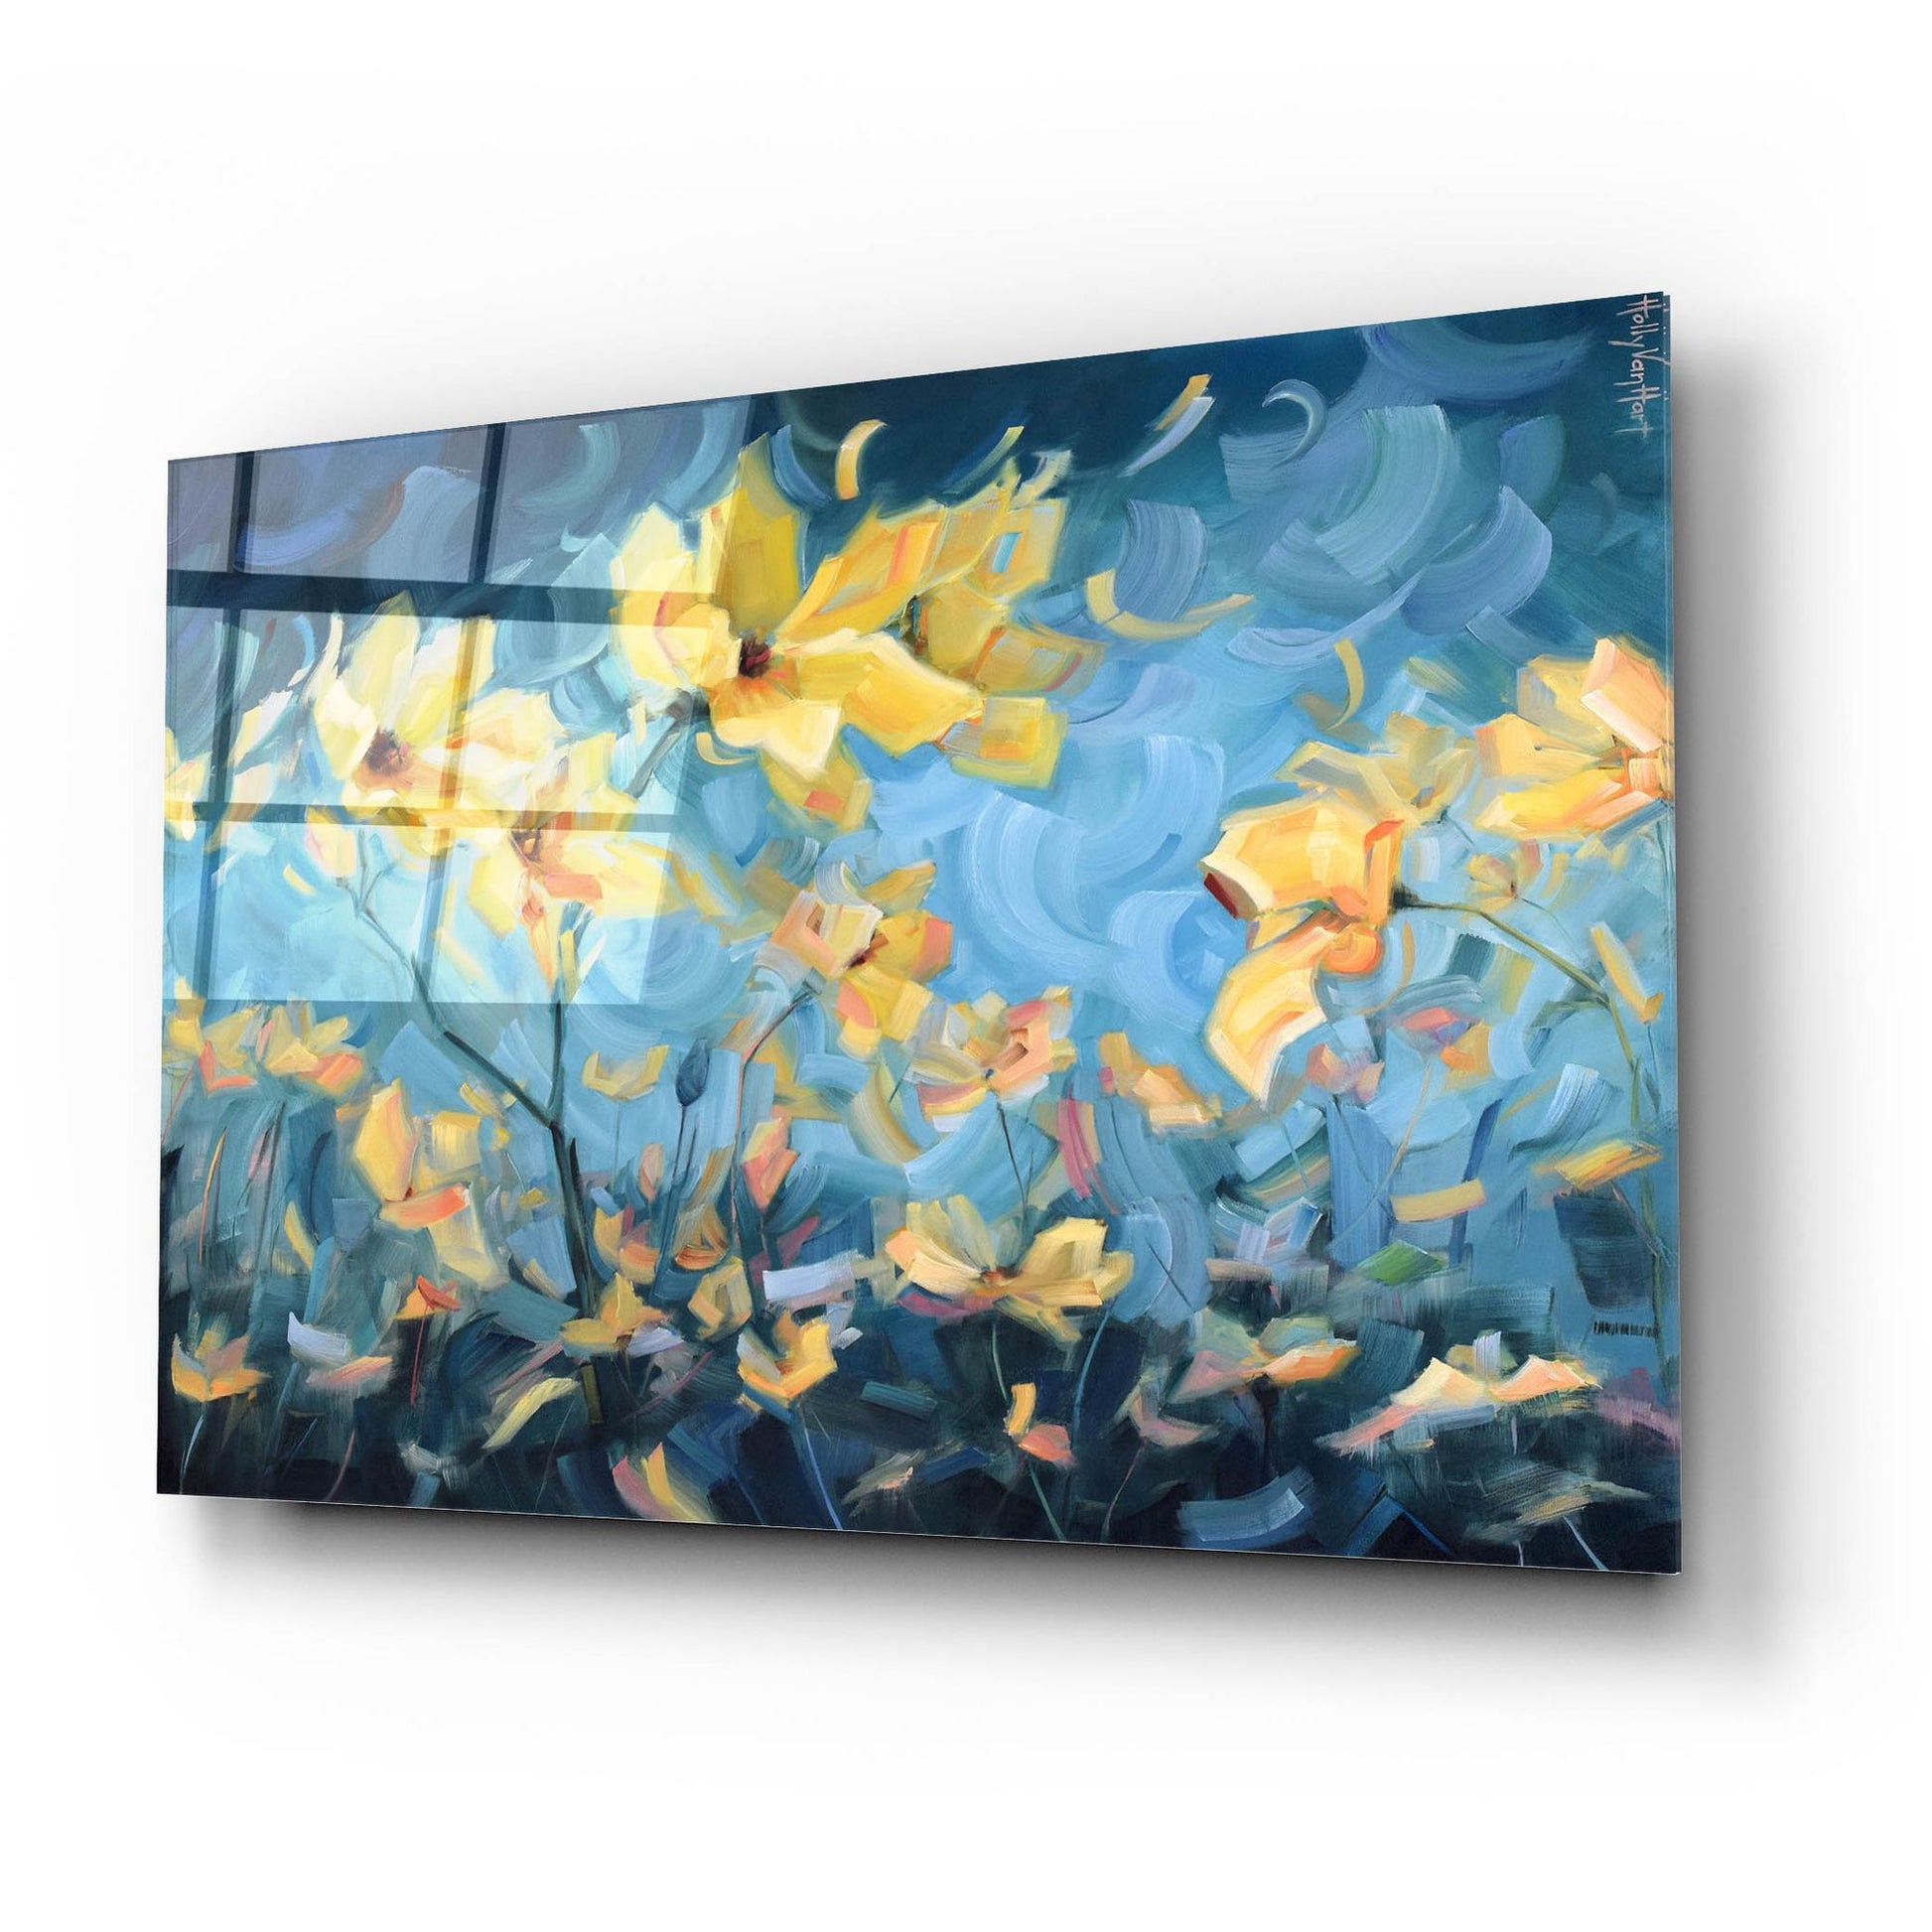 Epic Art 'How Dreams Are Made' by Holly Van Hart, Acrylic Glass Wall Art,24x16